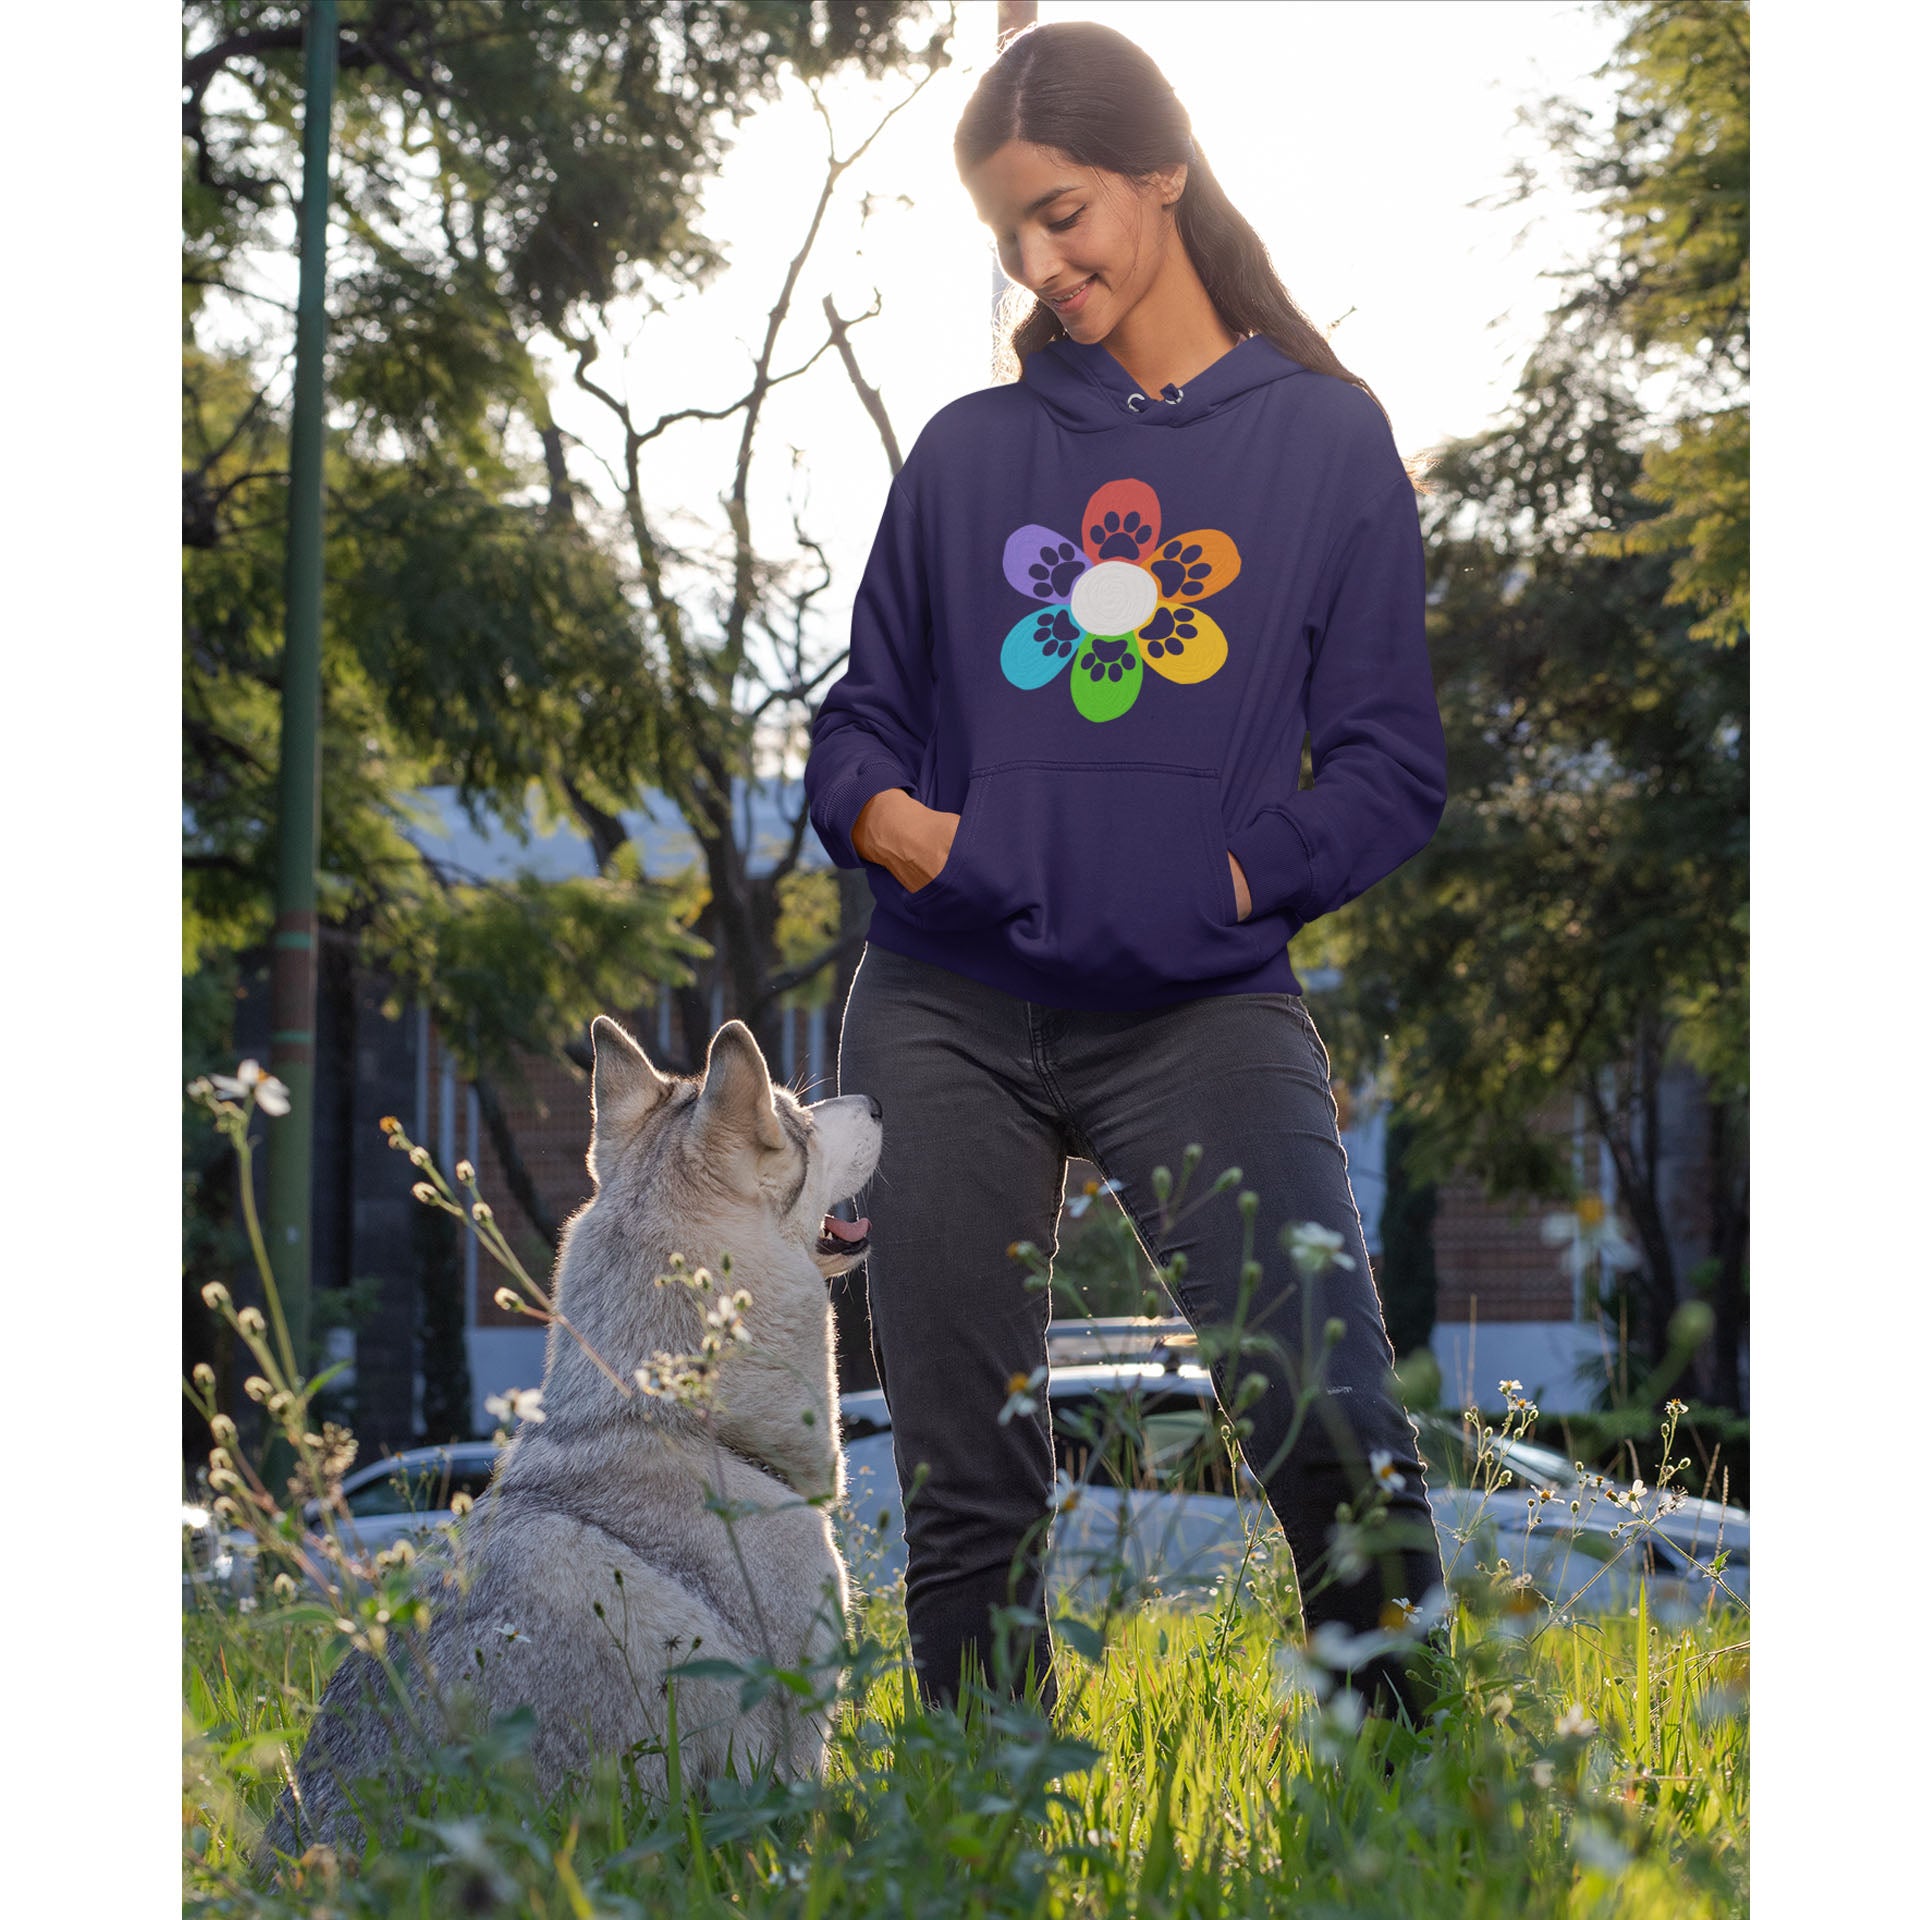  A young woman, dressed in a Dogs Pure Love flower paw print hoodie, stands in a garden with her hands in her pockets. She looks down at her dog, who gazes up at her with adoration.